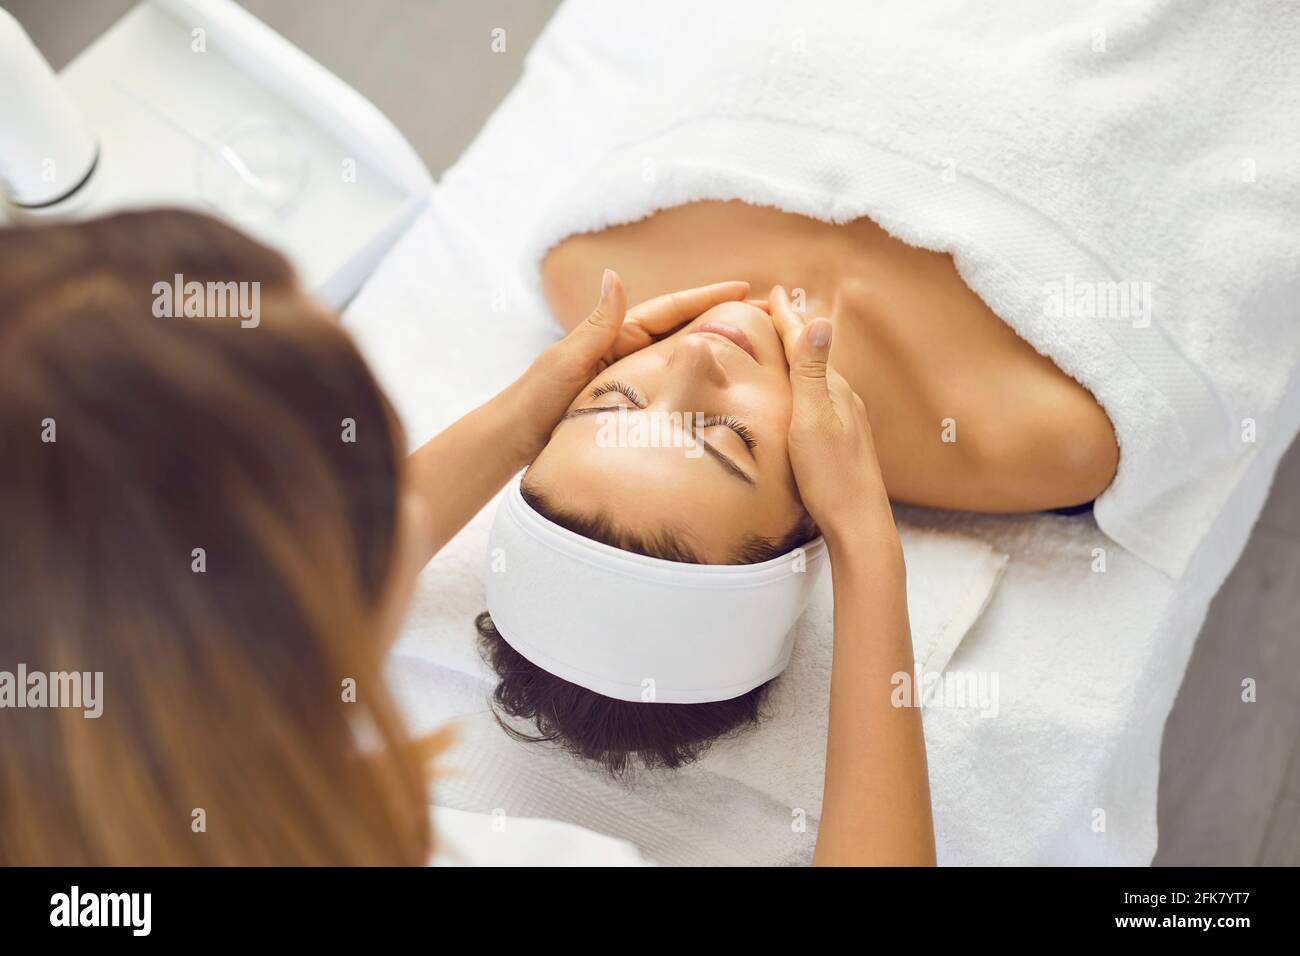 Young beautiful woman has relaxed and is enjoying a facial massage from a spa specialist. Stock Photo